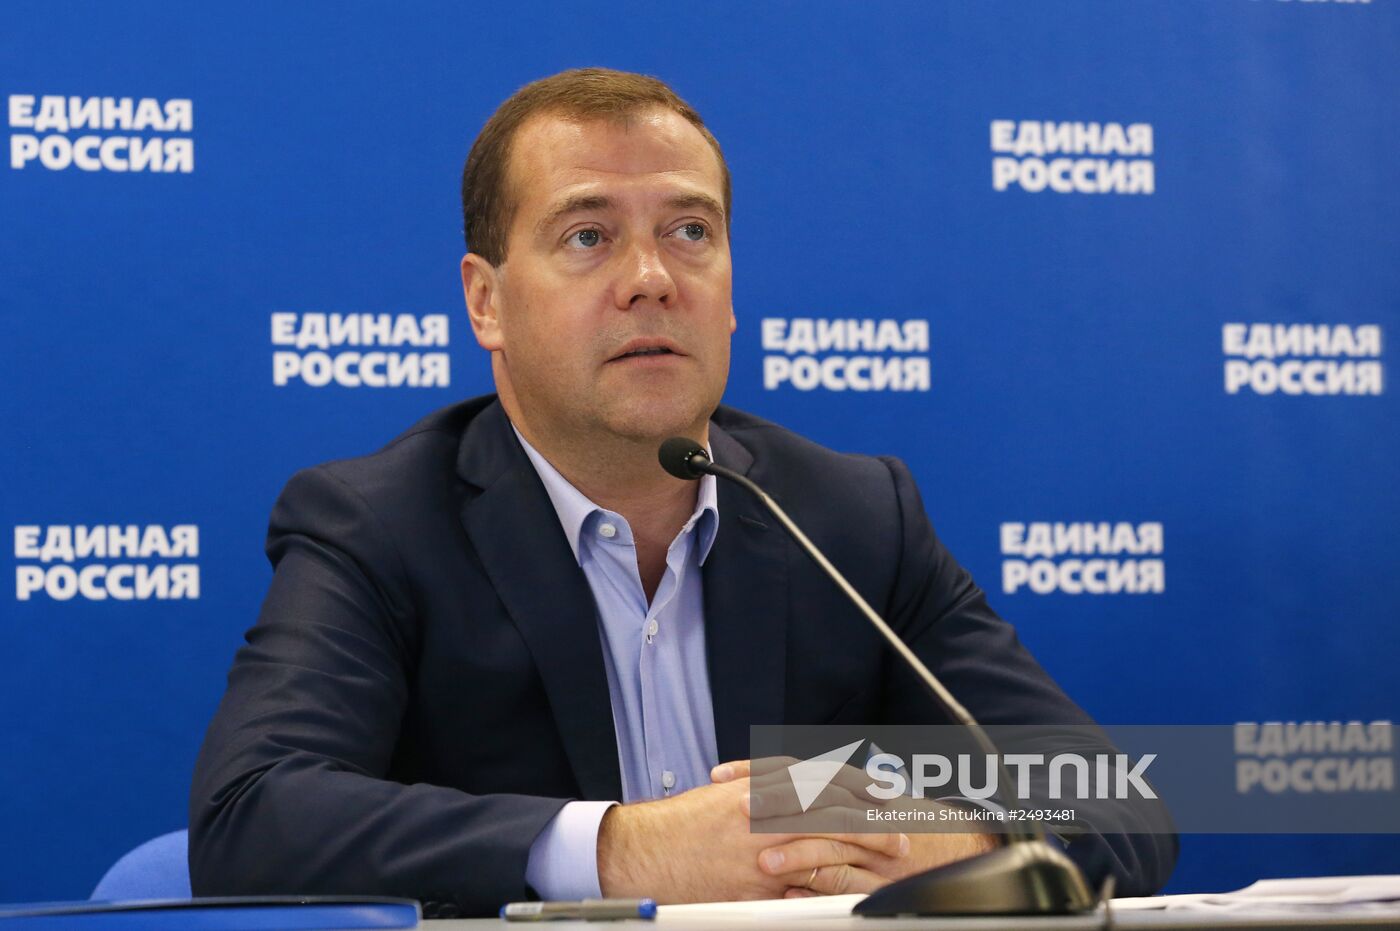 Dmitry Medvedev at the headquarters of United Russia party